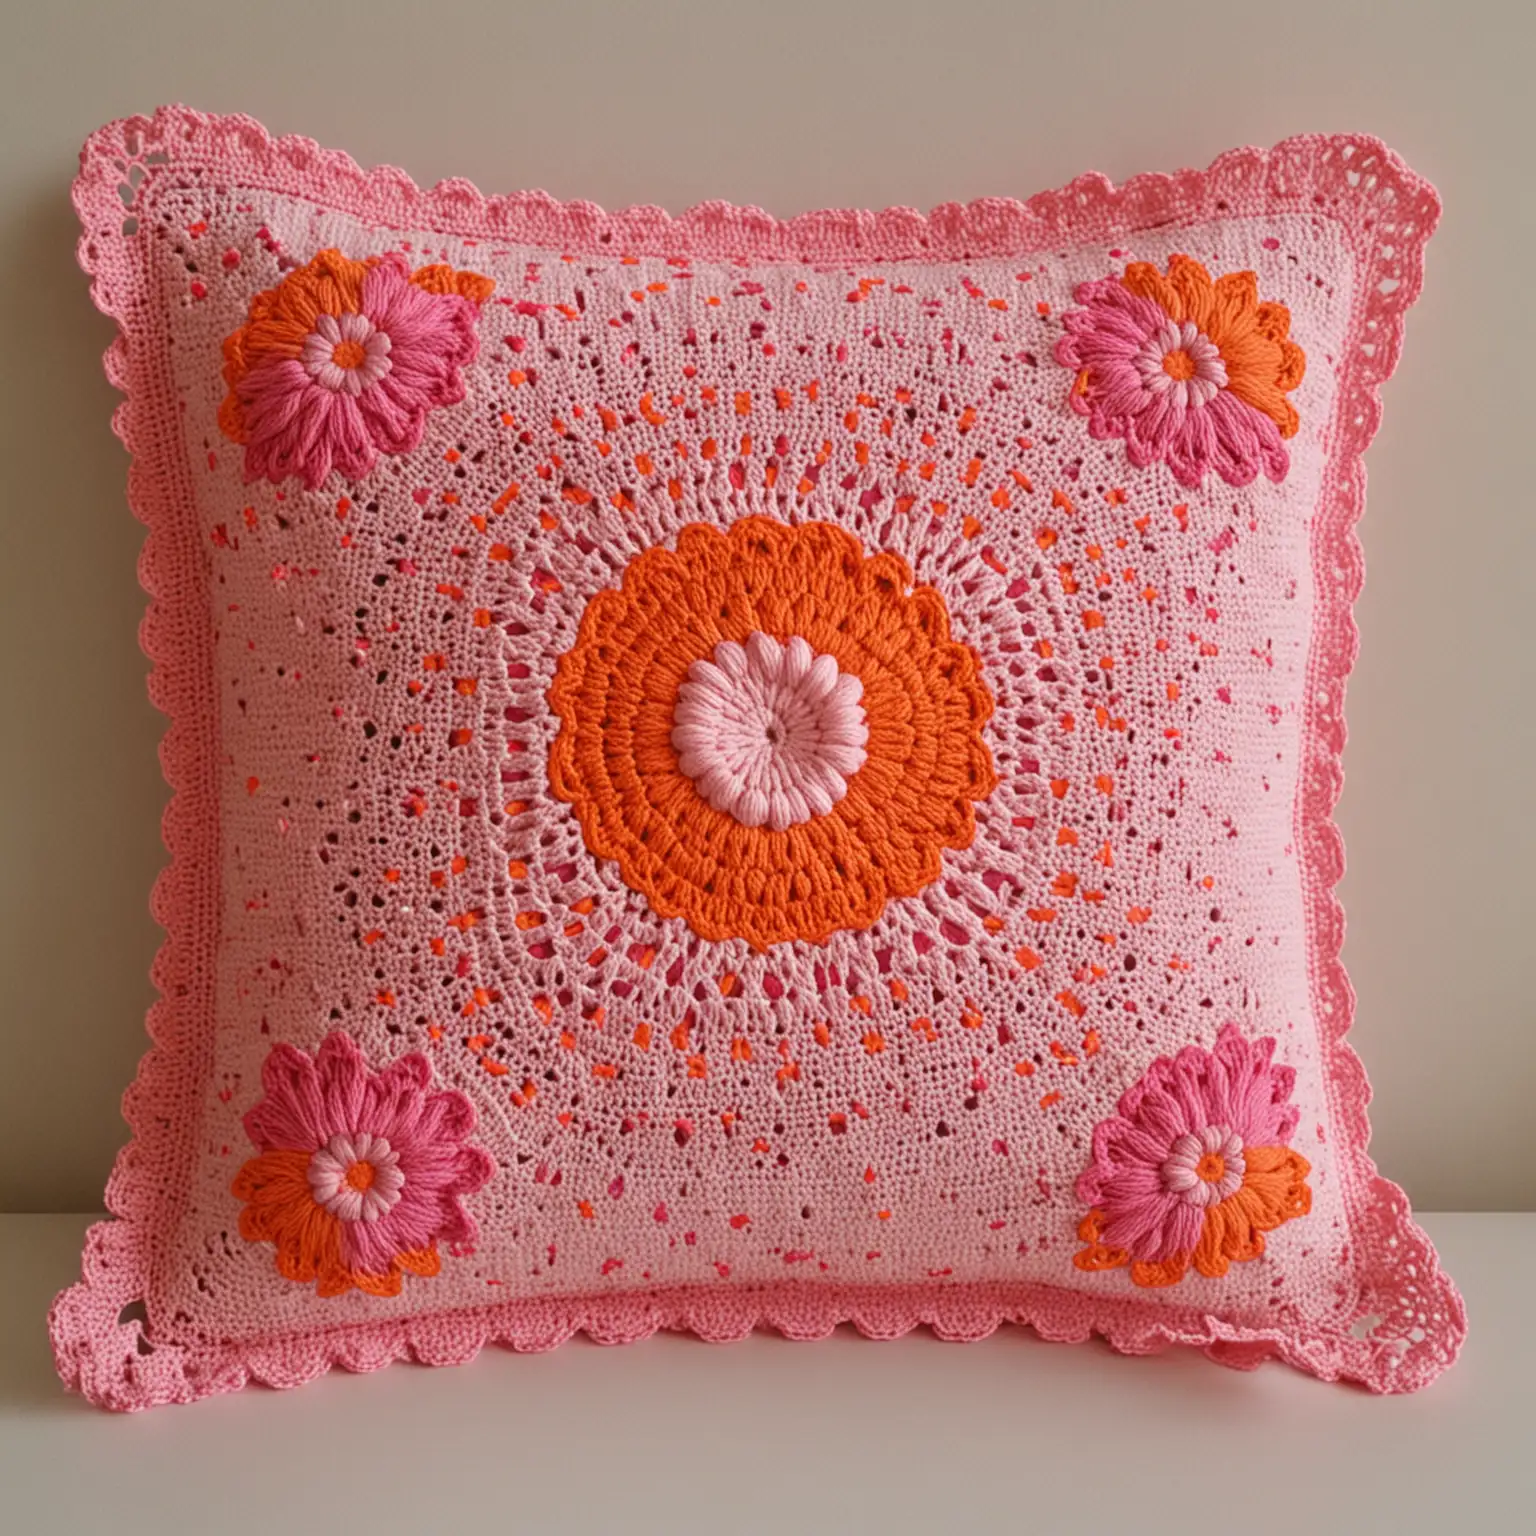 Handmade Crochet Cushion Cover in Vibrant Pink and Orange Colors